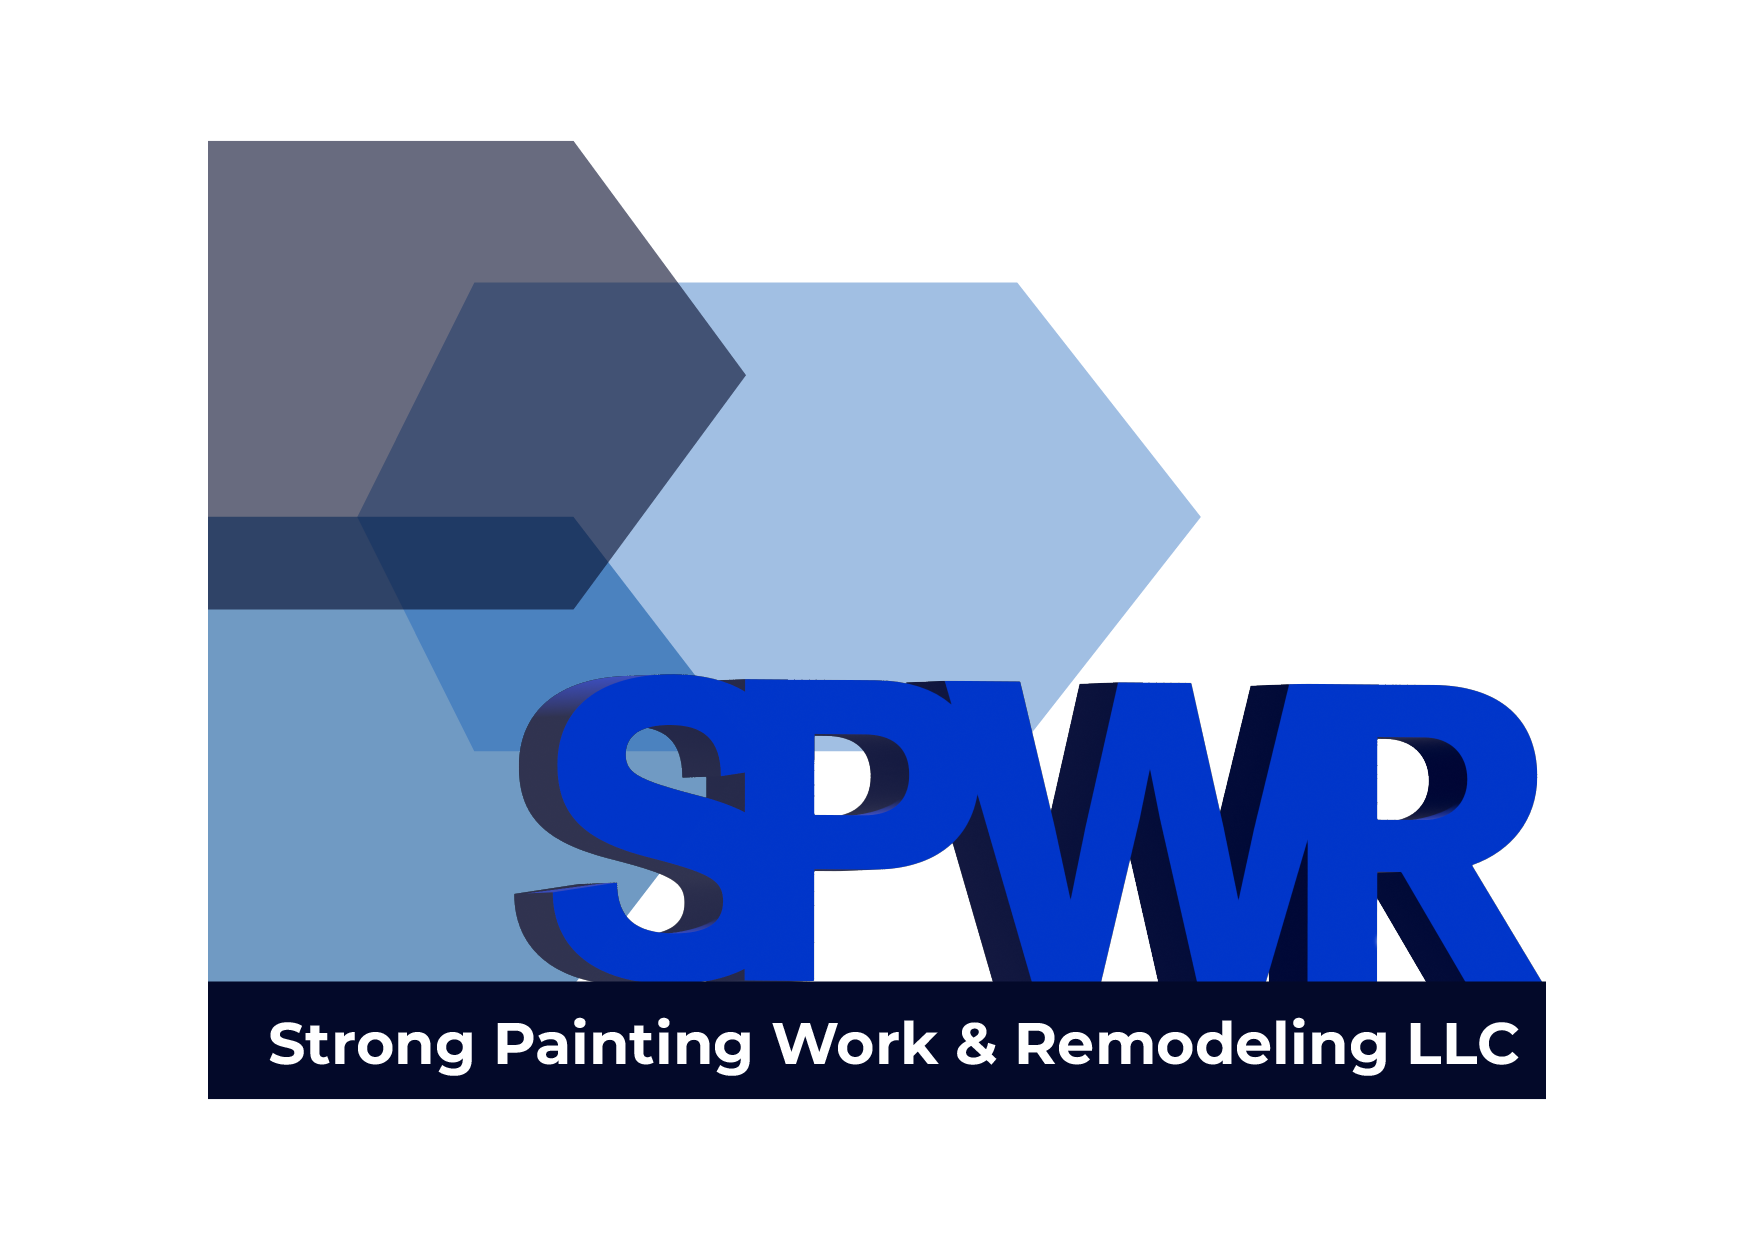 Hire us for top-quality painting services for your House